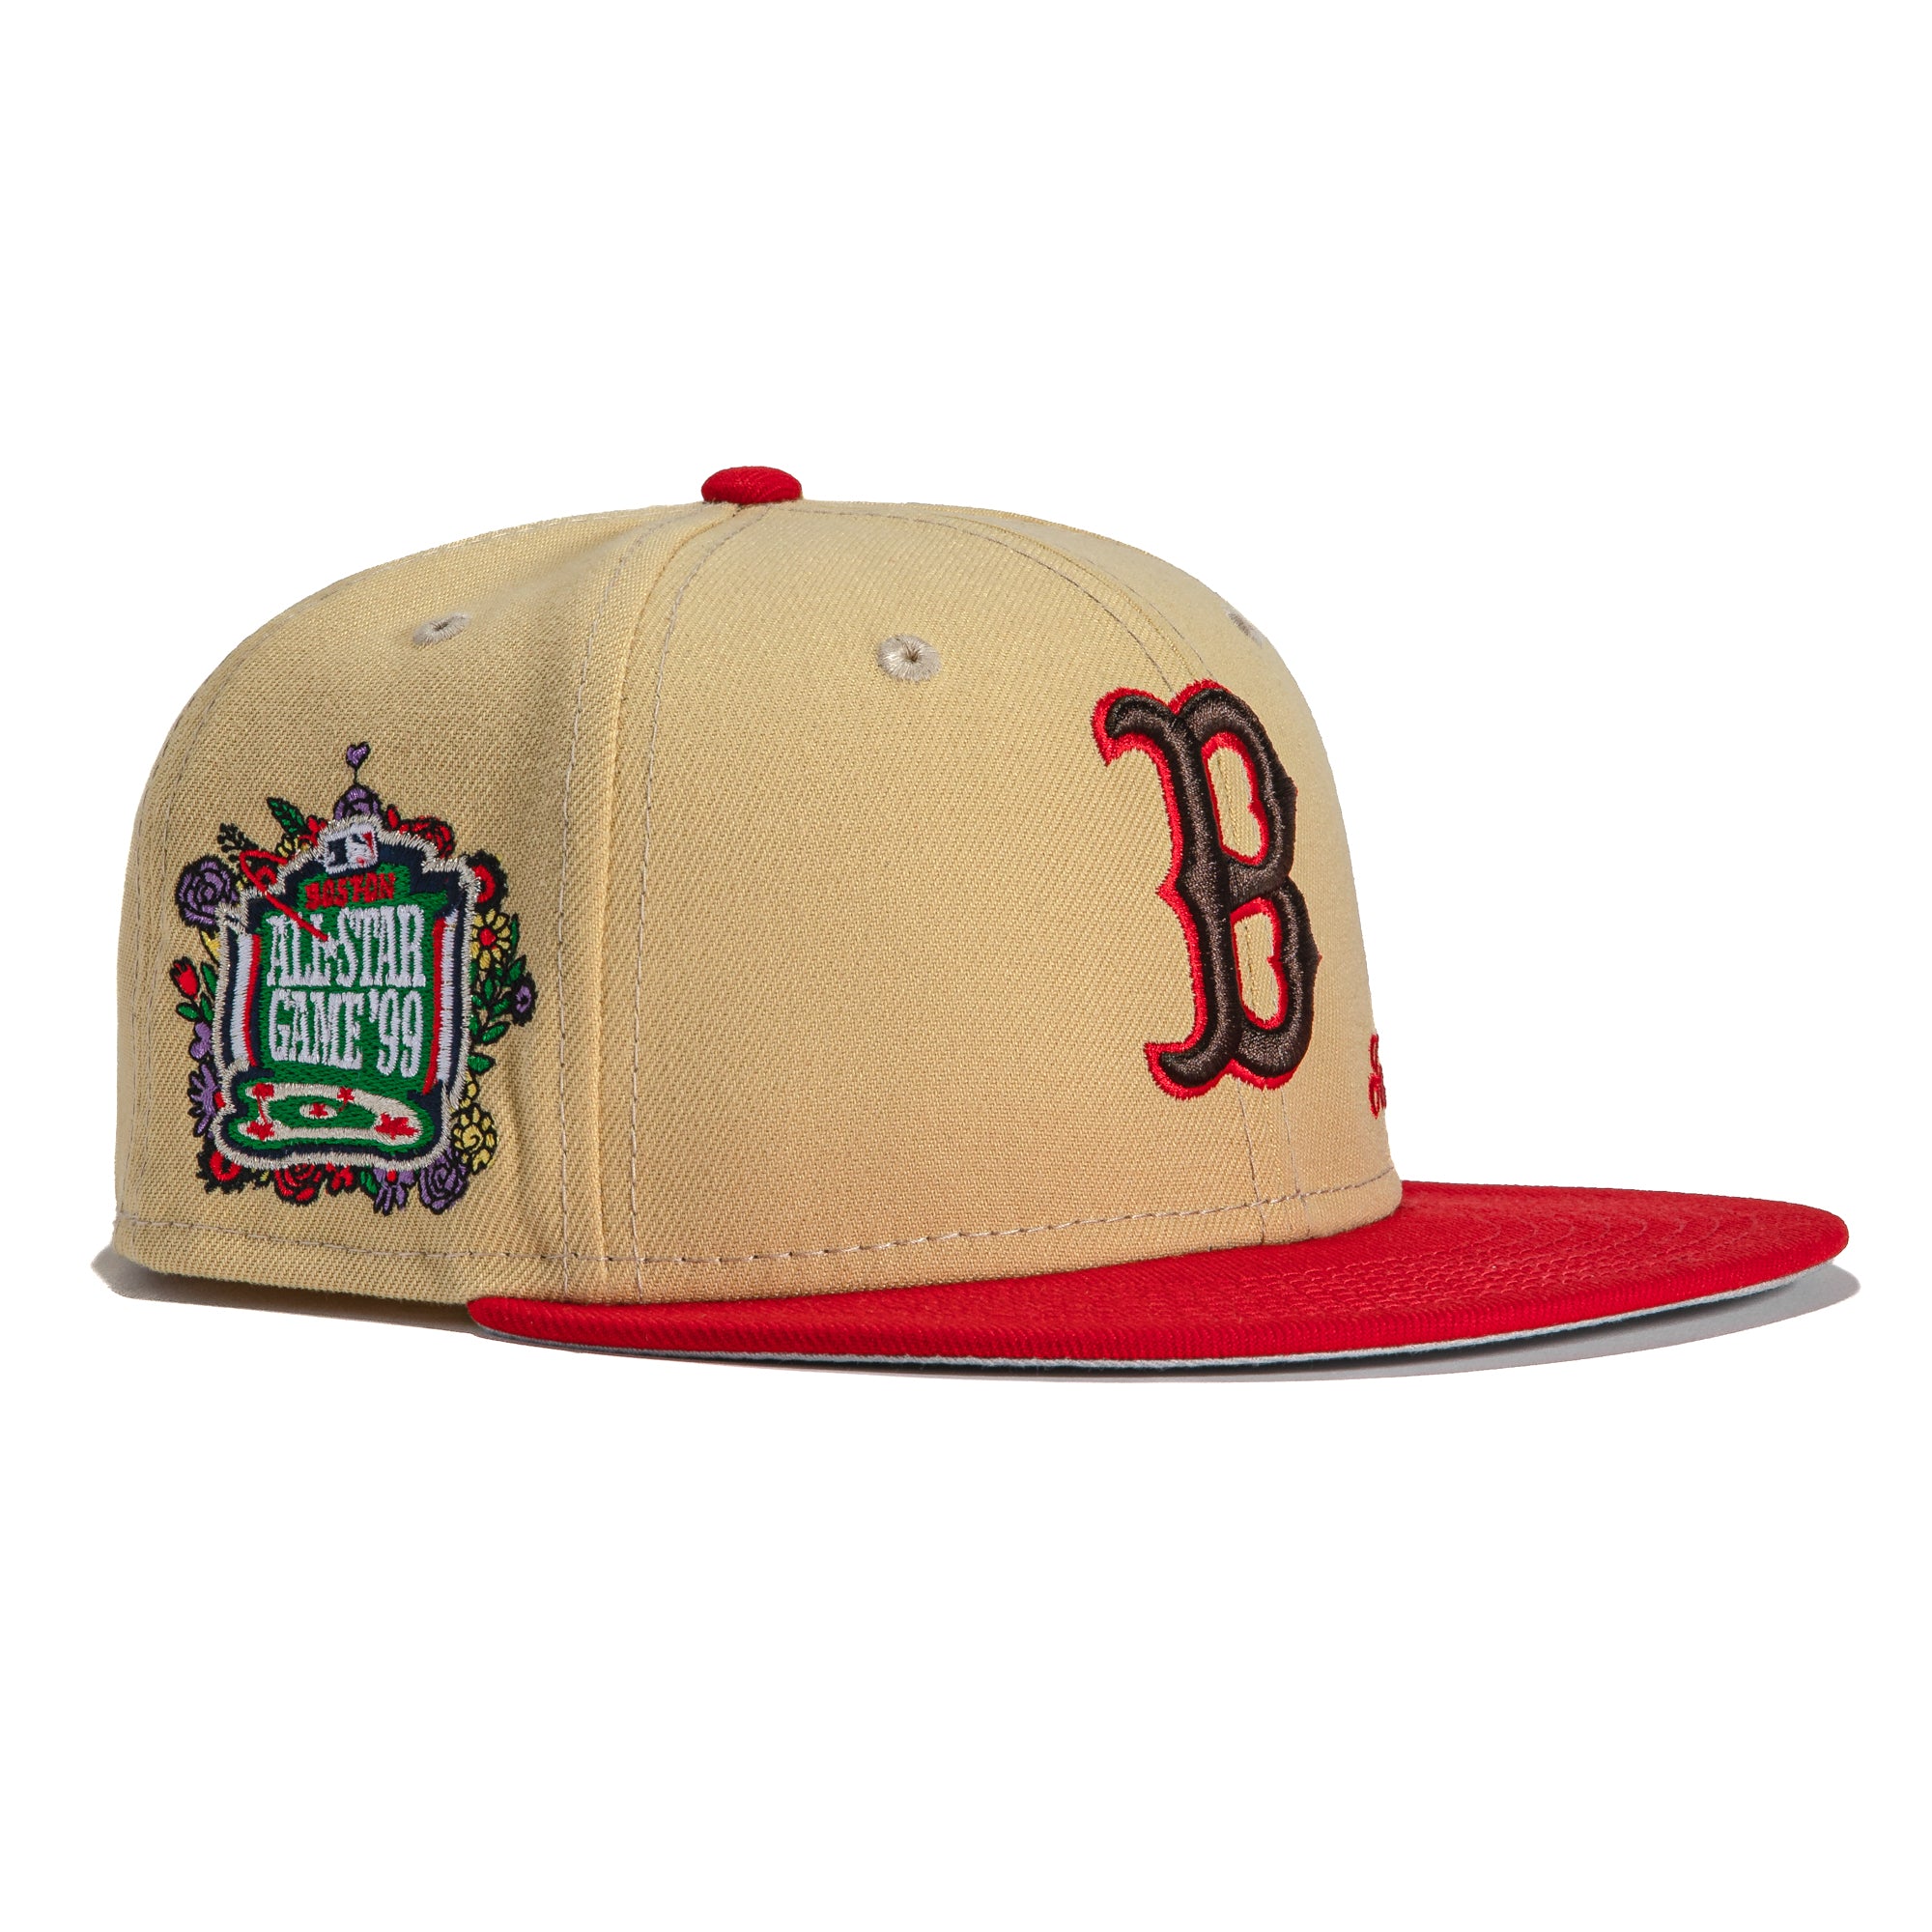 Boston Red Sox 1999 All Star Game Snapback Hat